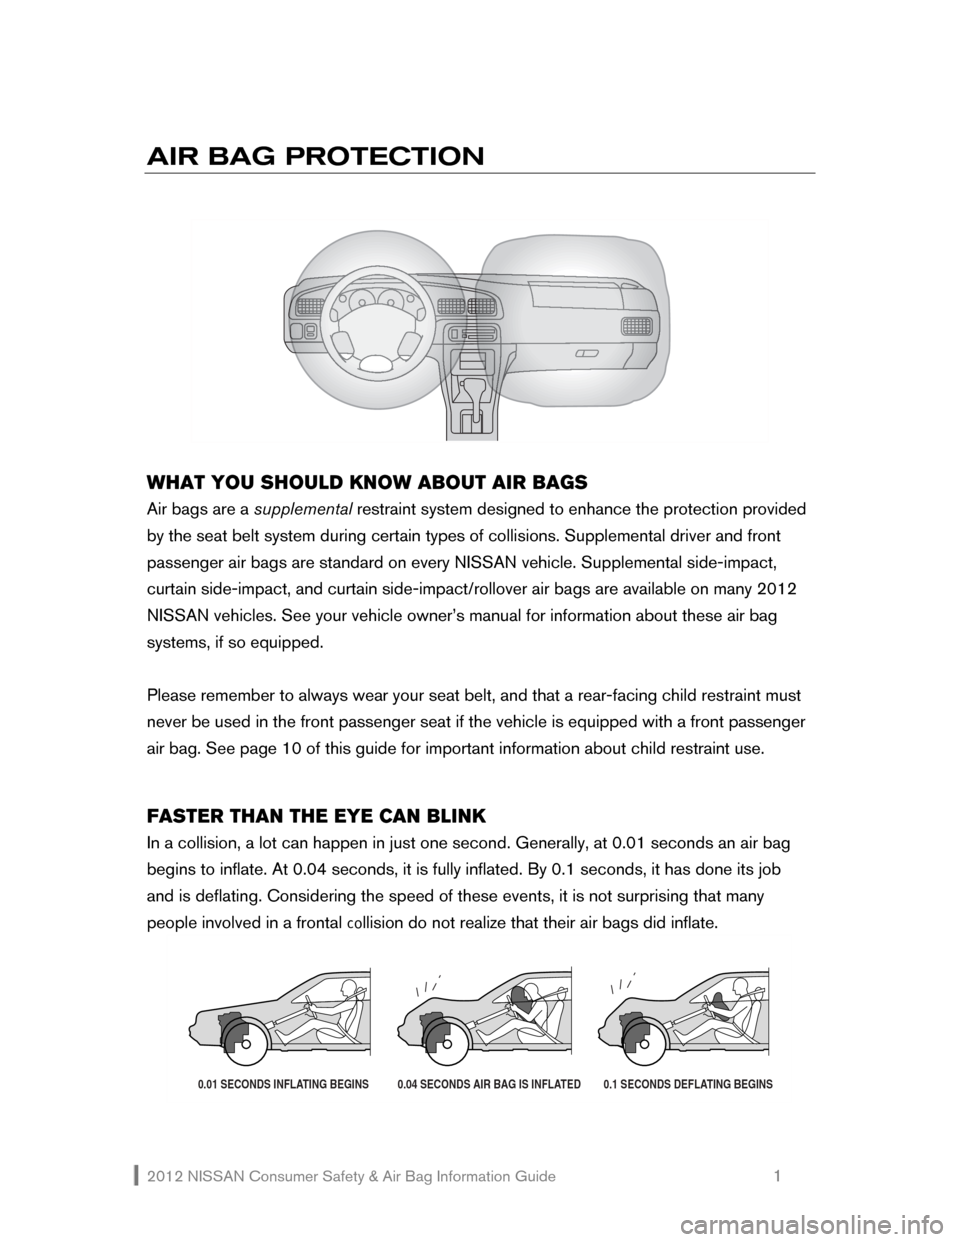 NISSAN JUKE 2012 F15 / 1.G Consumer Safety Air Bag Information Guide 2012 NISSAN Consumer Safety & Air Bag Information Guide                                                   1 
AIR BAG PROTECTION 
    
 
 
WHAT YOU SHOULD KNOW ABOUT AIR BAGS 
Air bags are a supplement